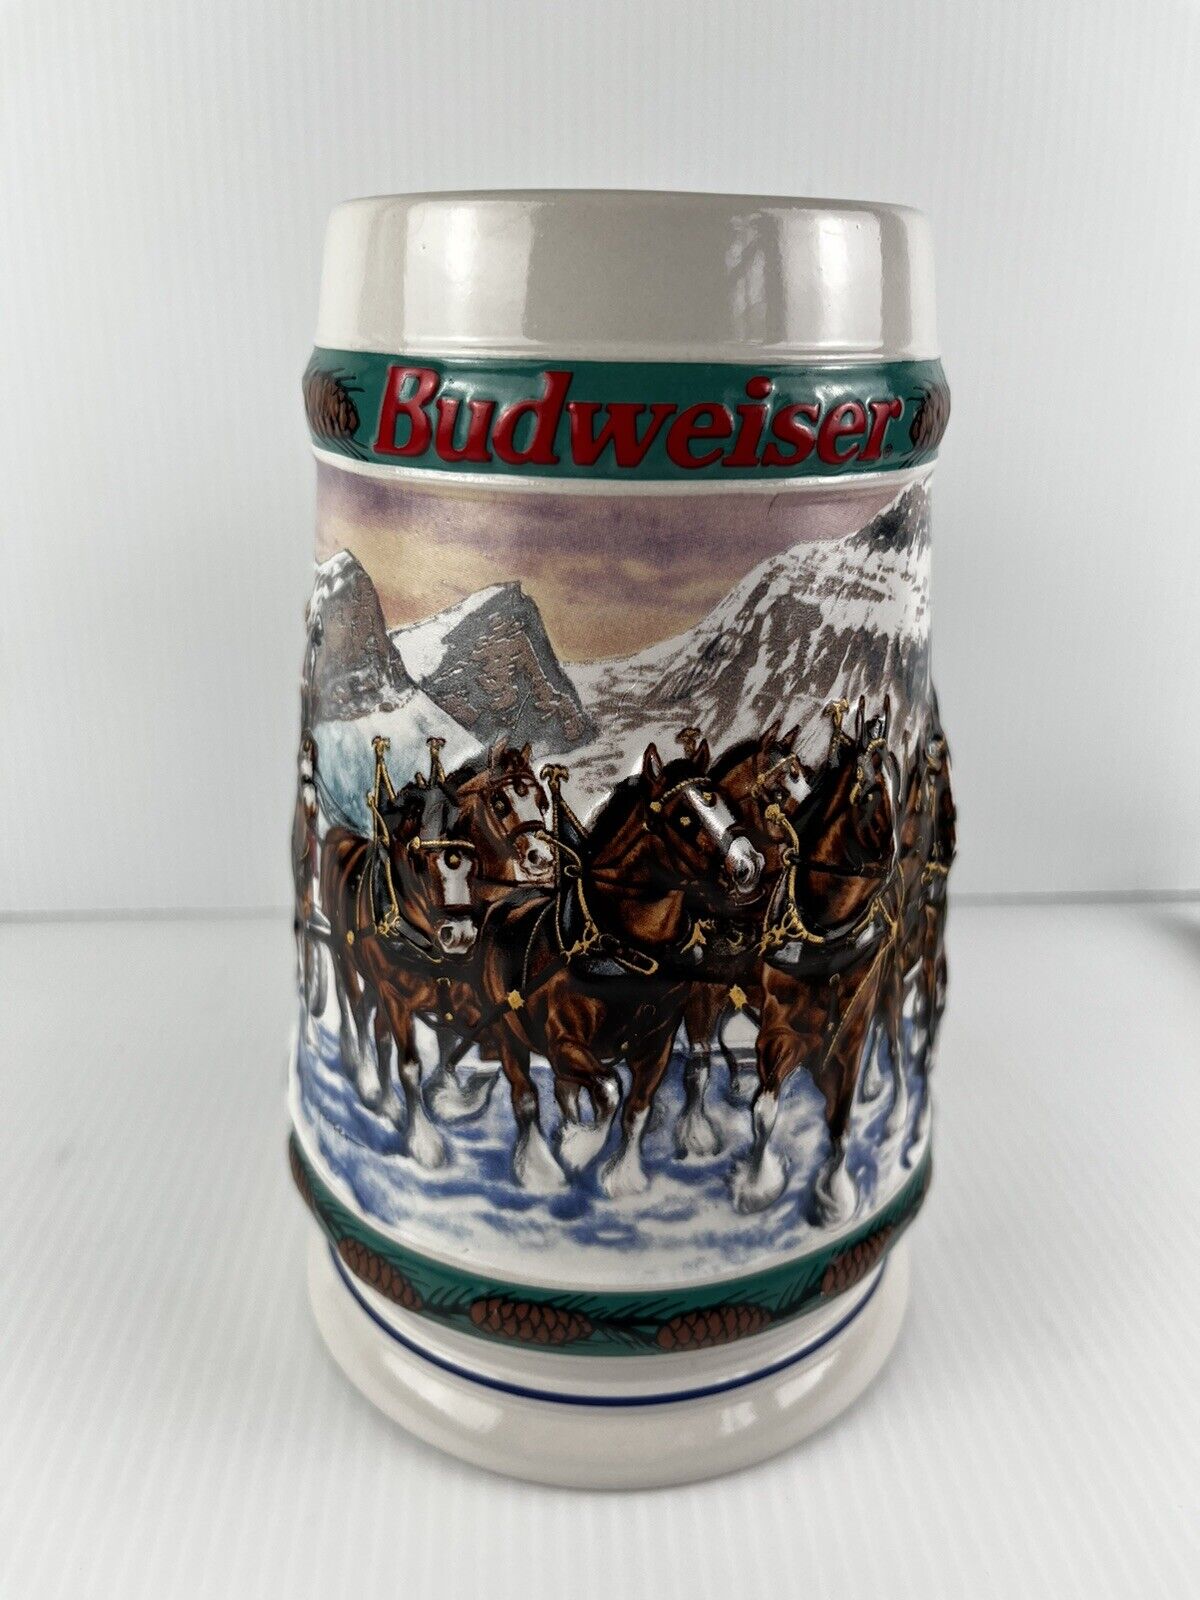 1993 BUDWEISER Holiday Beer Stein “Special Delivery” Anheuser Busch Clydesdale